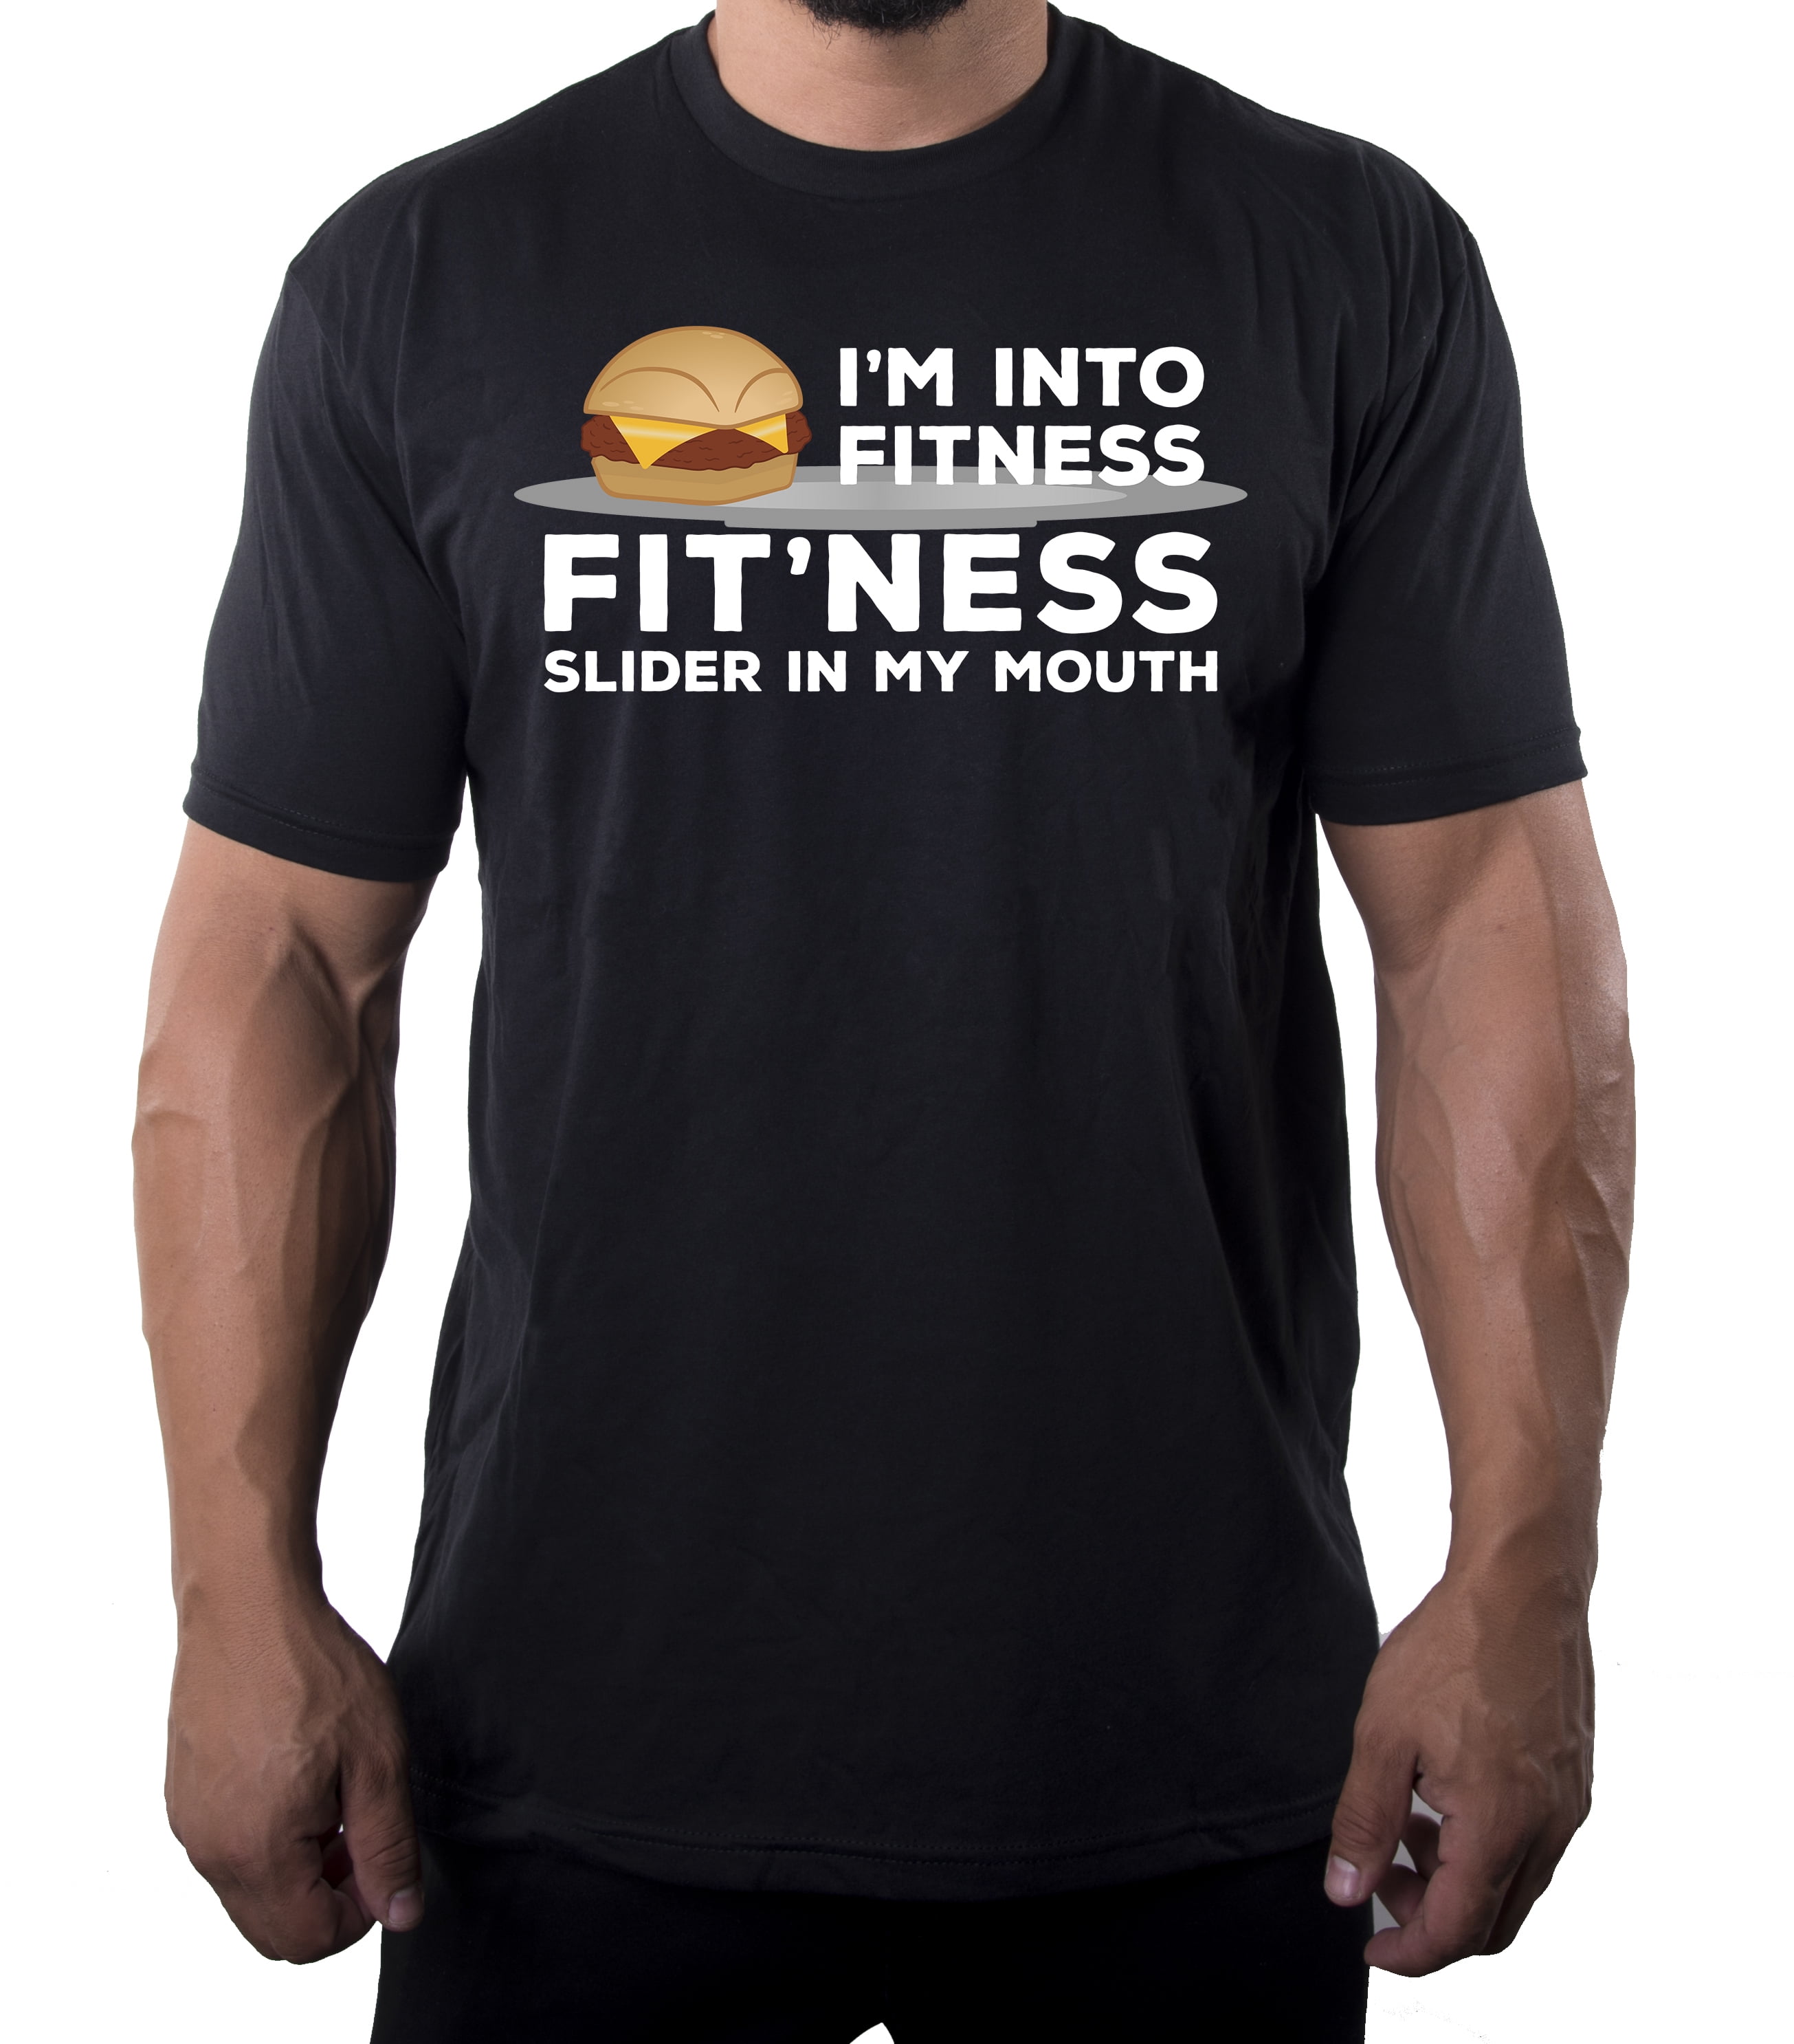 Men's Funny Fitness Slider T-shirts, Funny Graphic T-shirts, Gym T-shirts -  Black MH200FOOD S3 4XL 